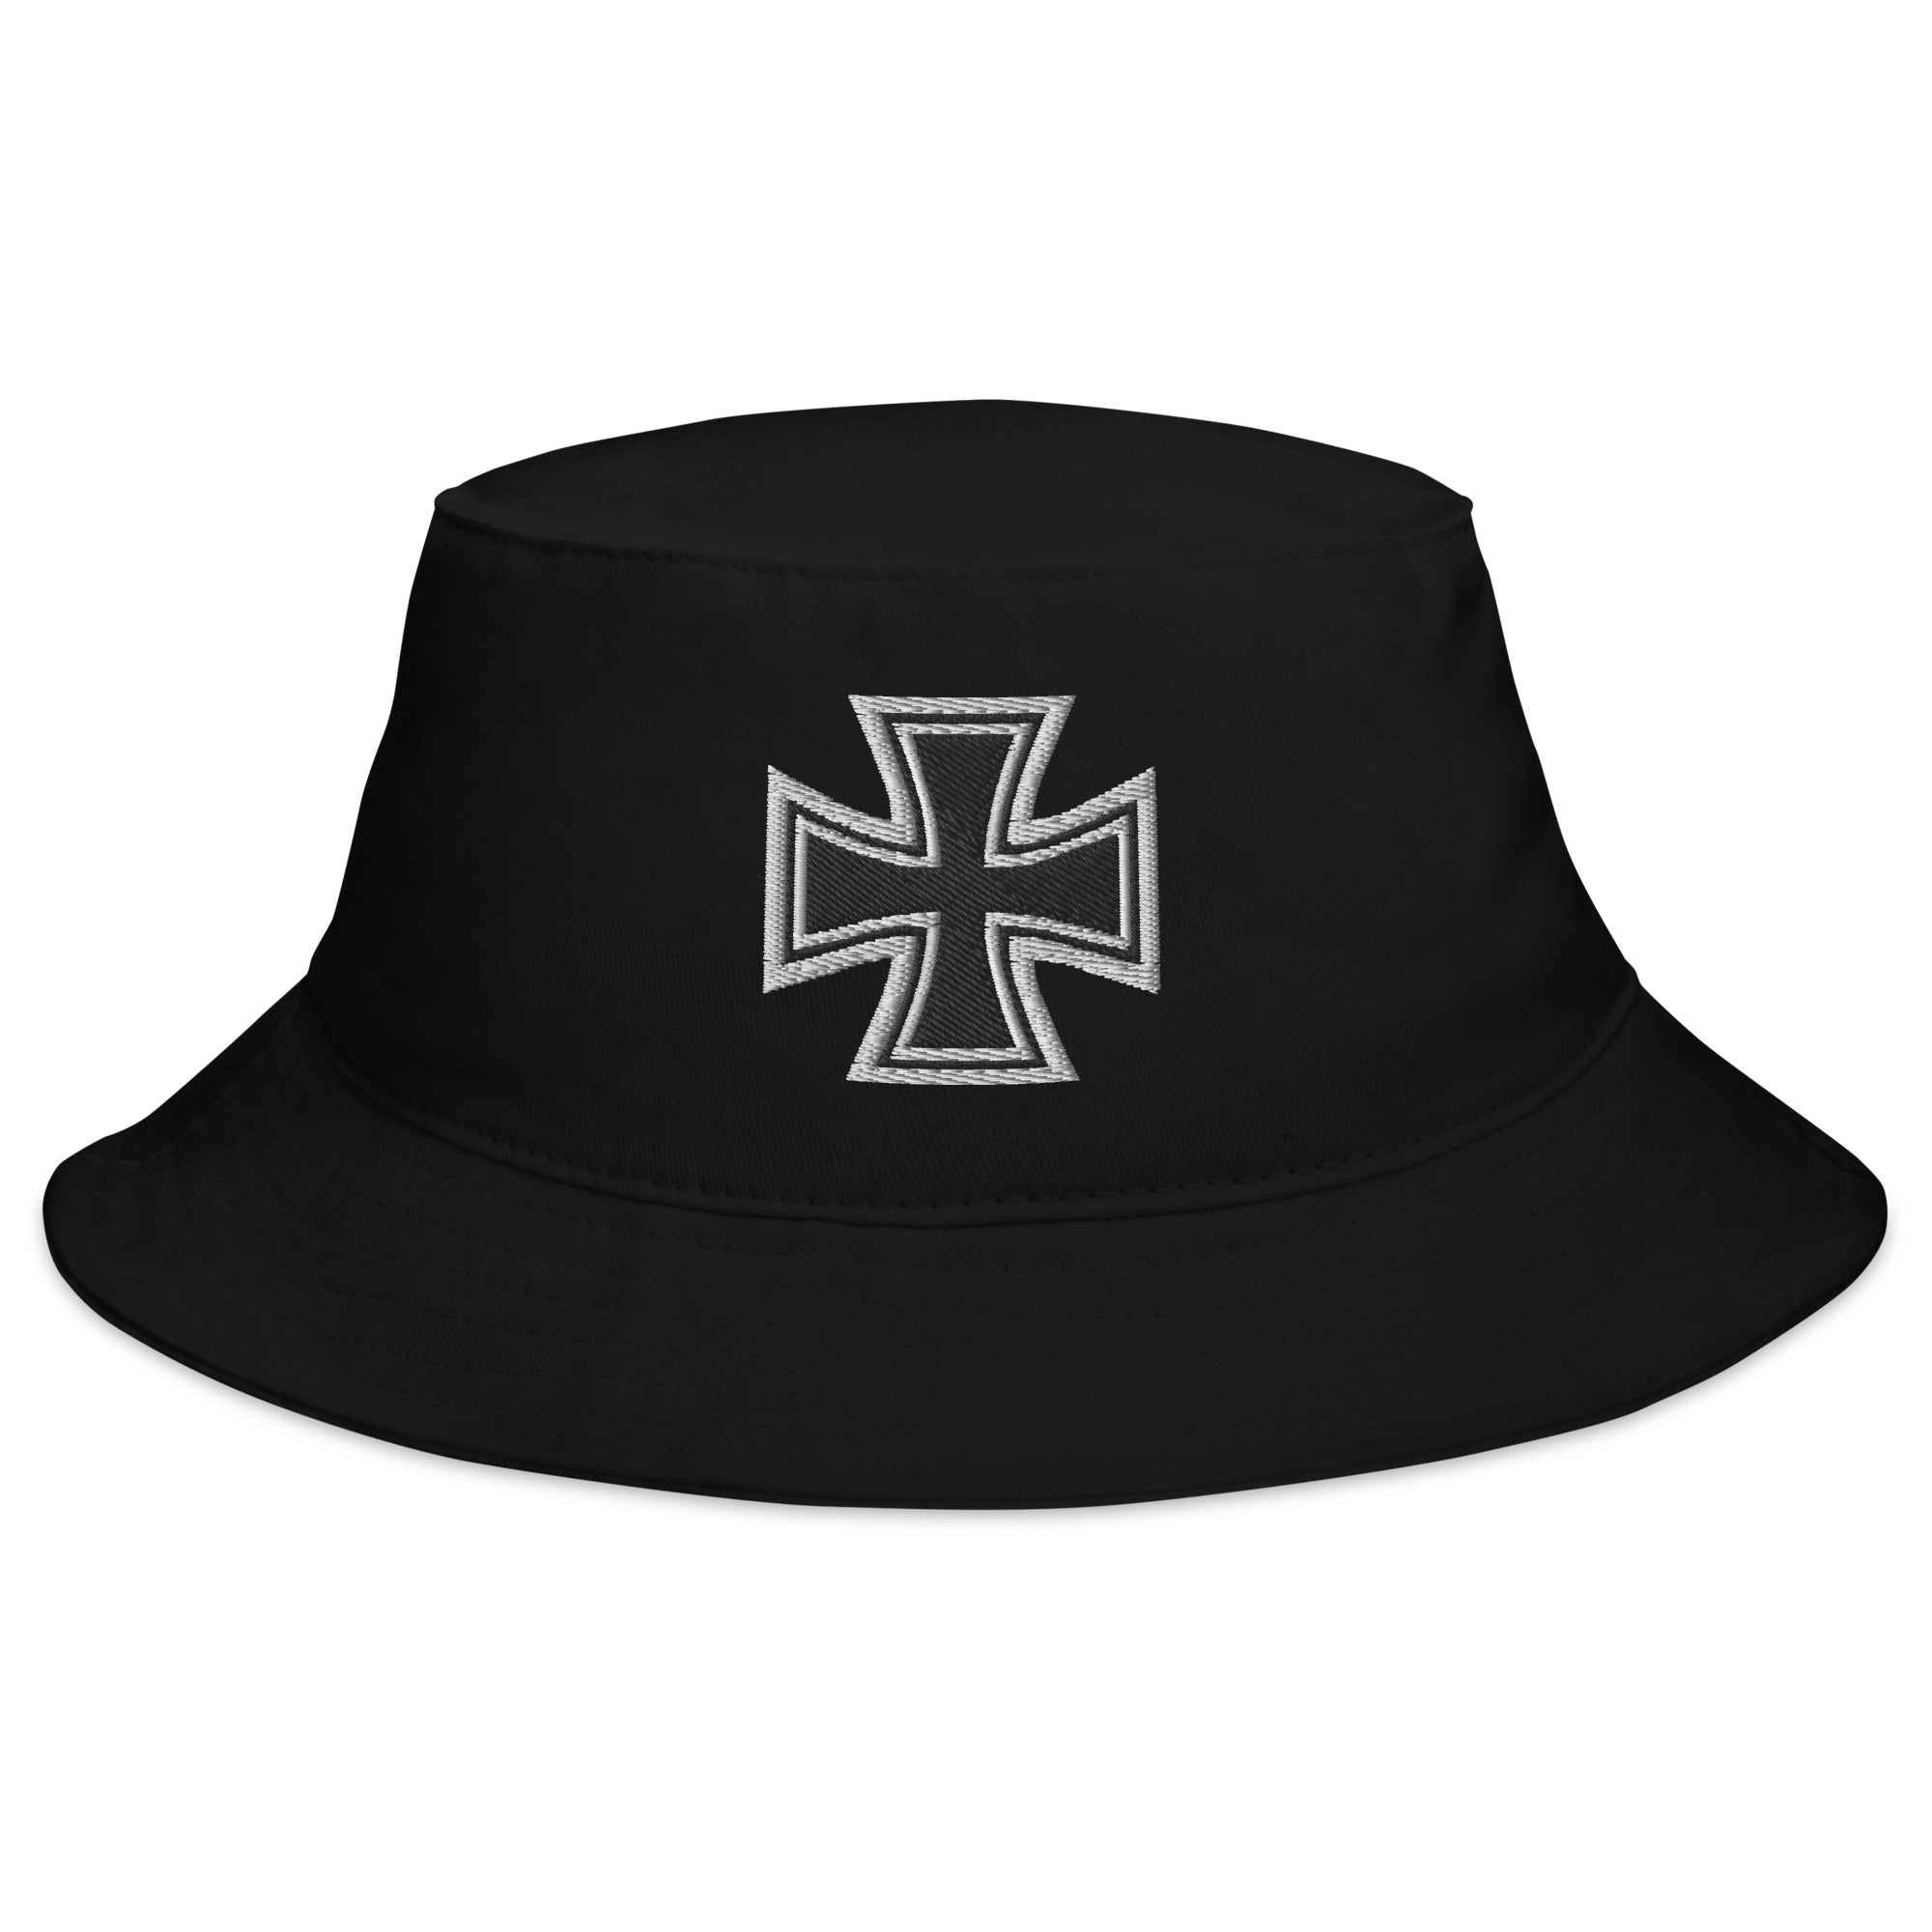 Iron Cross Occult Symbol World War II Style Embroidered Bucket Hat